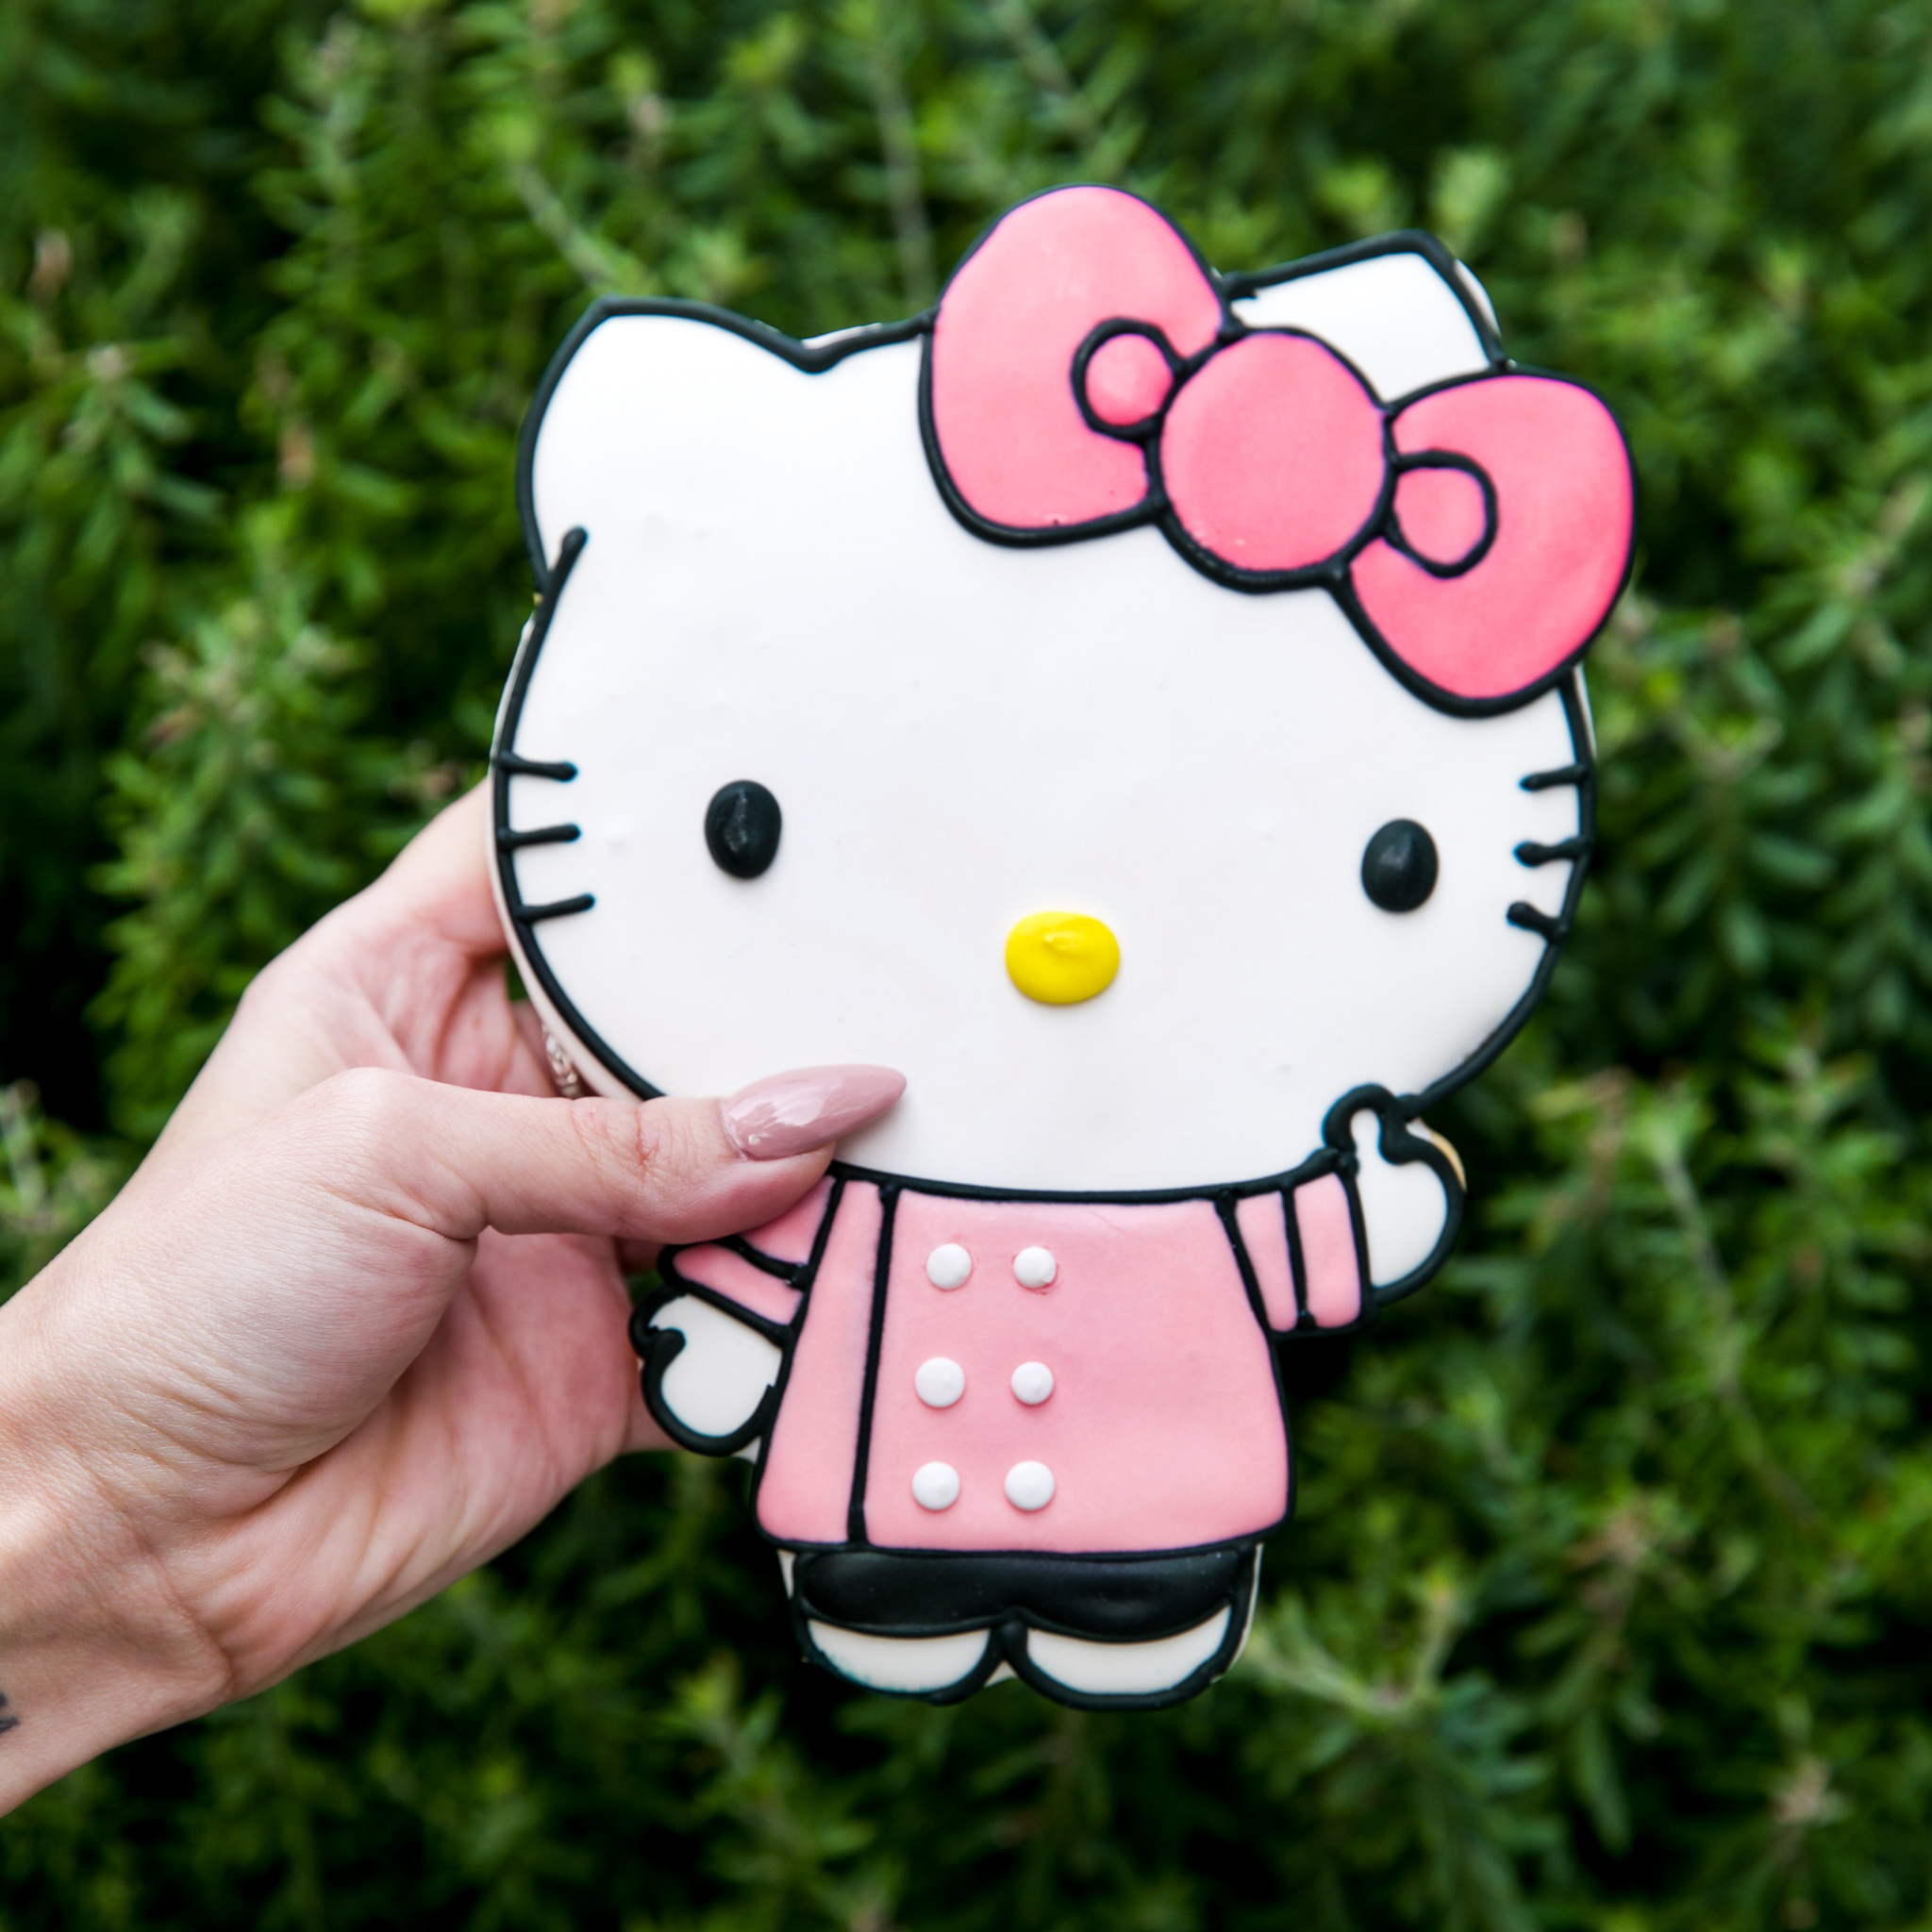 A big Hello Kitty cookie